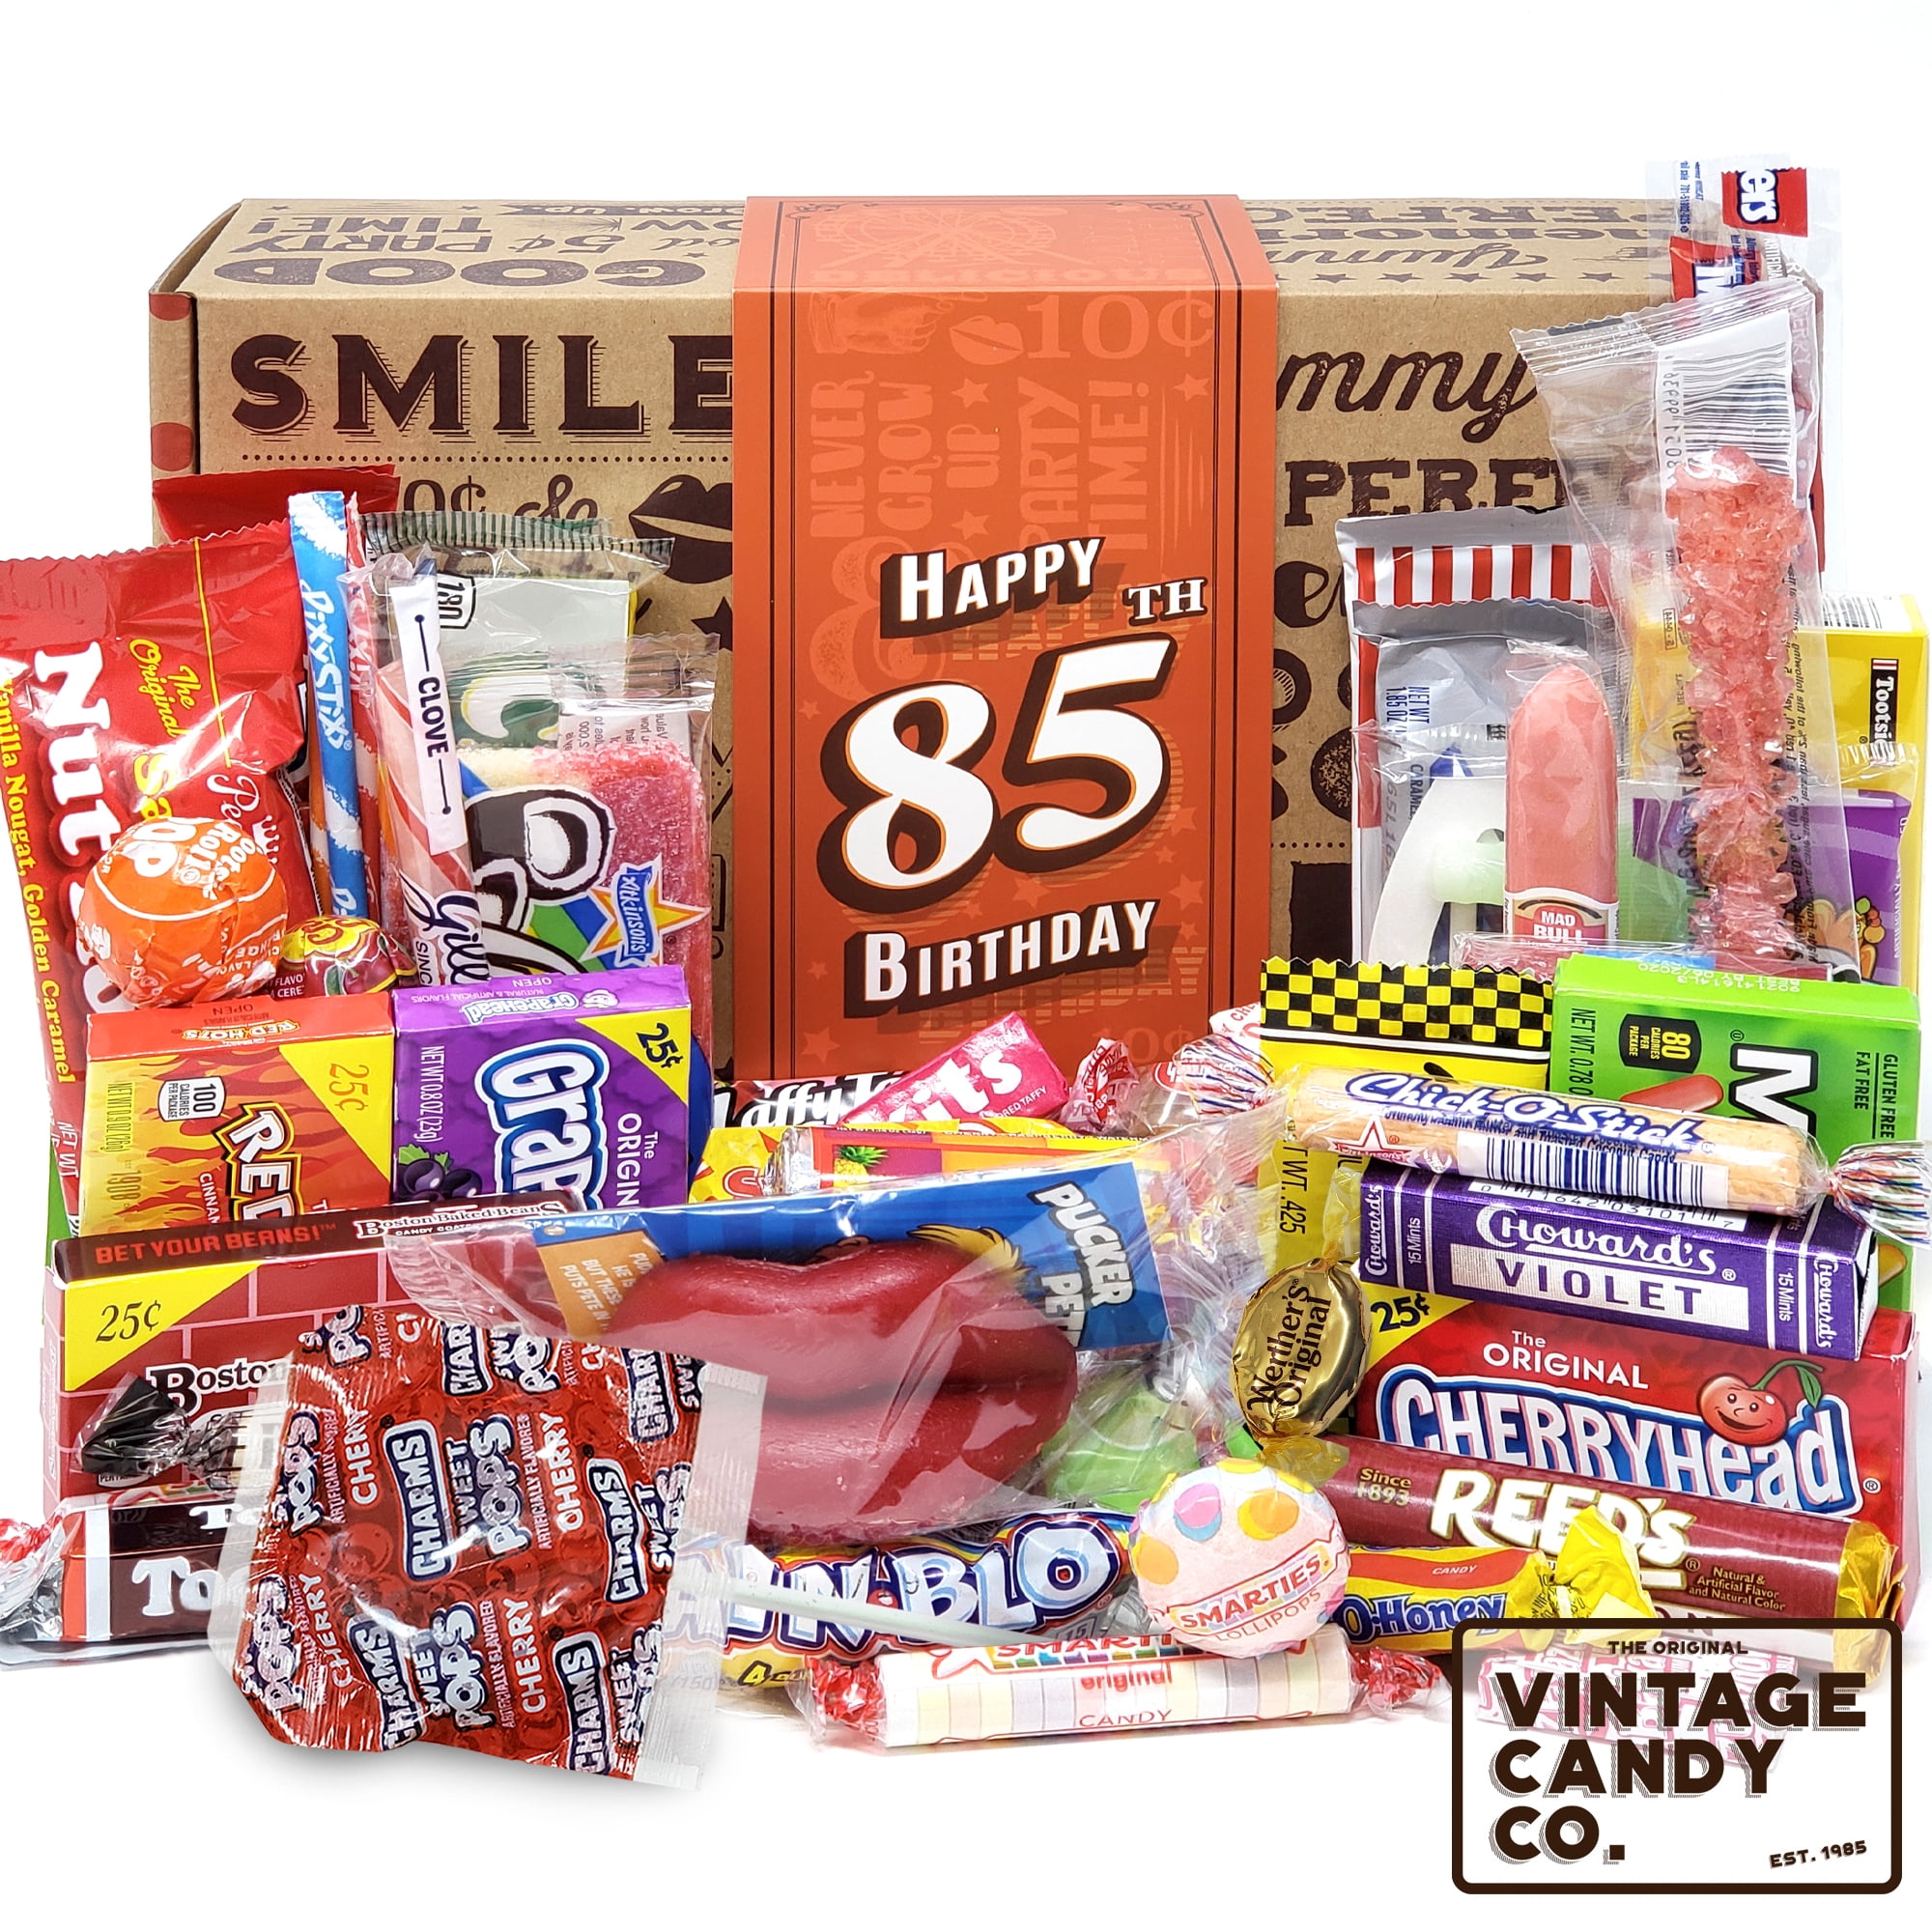 VINTAGE CANDY CO. 85TH BIRTHDAY RETRO CANDY GIFT BOX